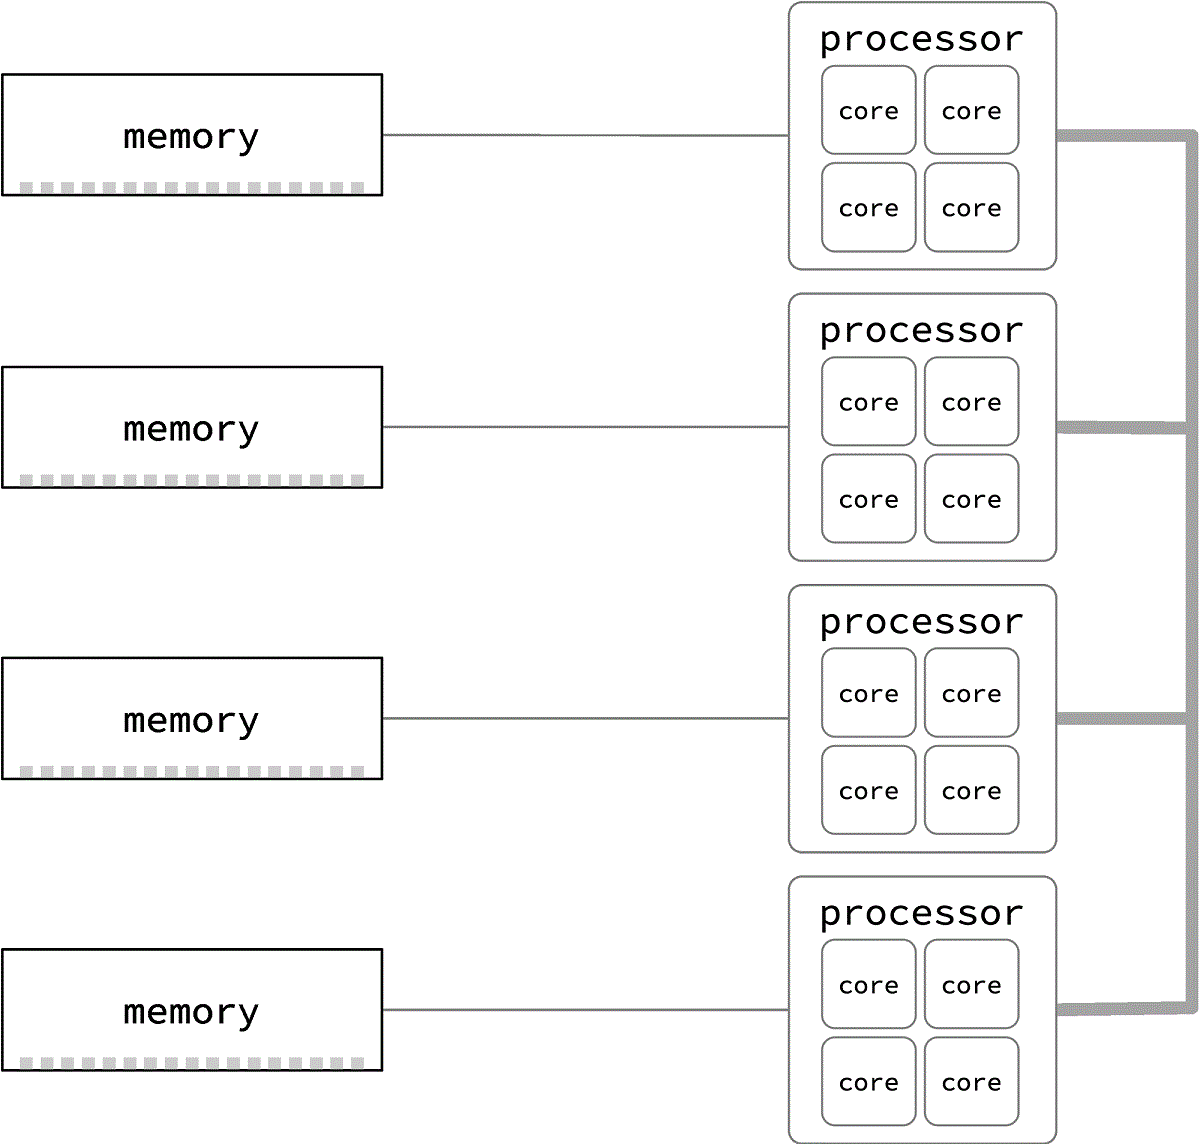 Four processors connect via a crossbar bus, but each has preferred access to a region of memory.